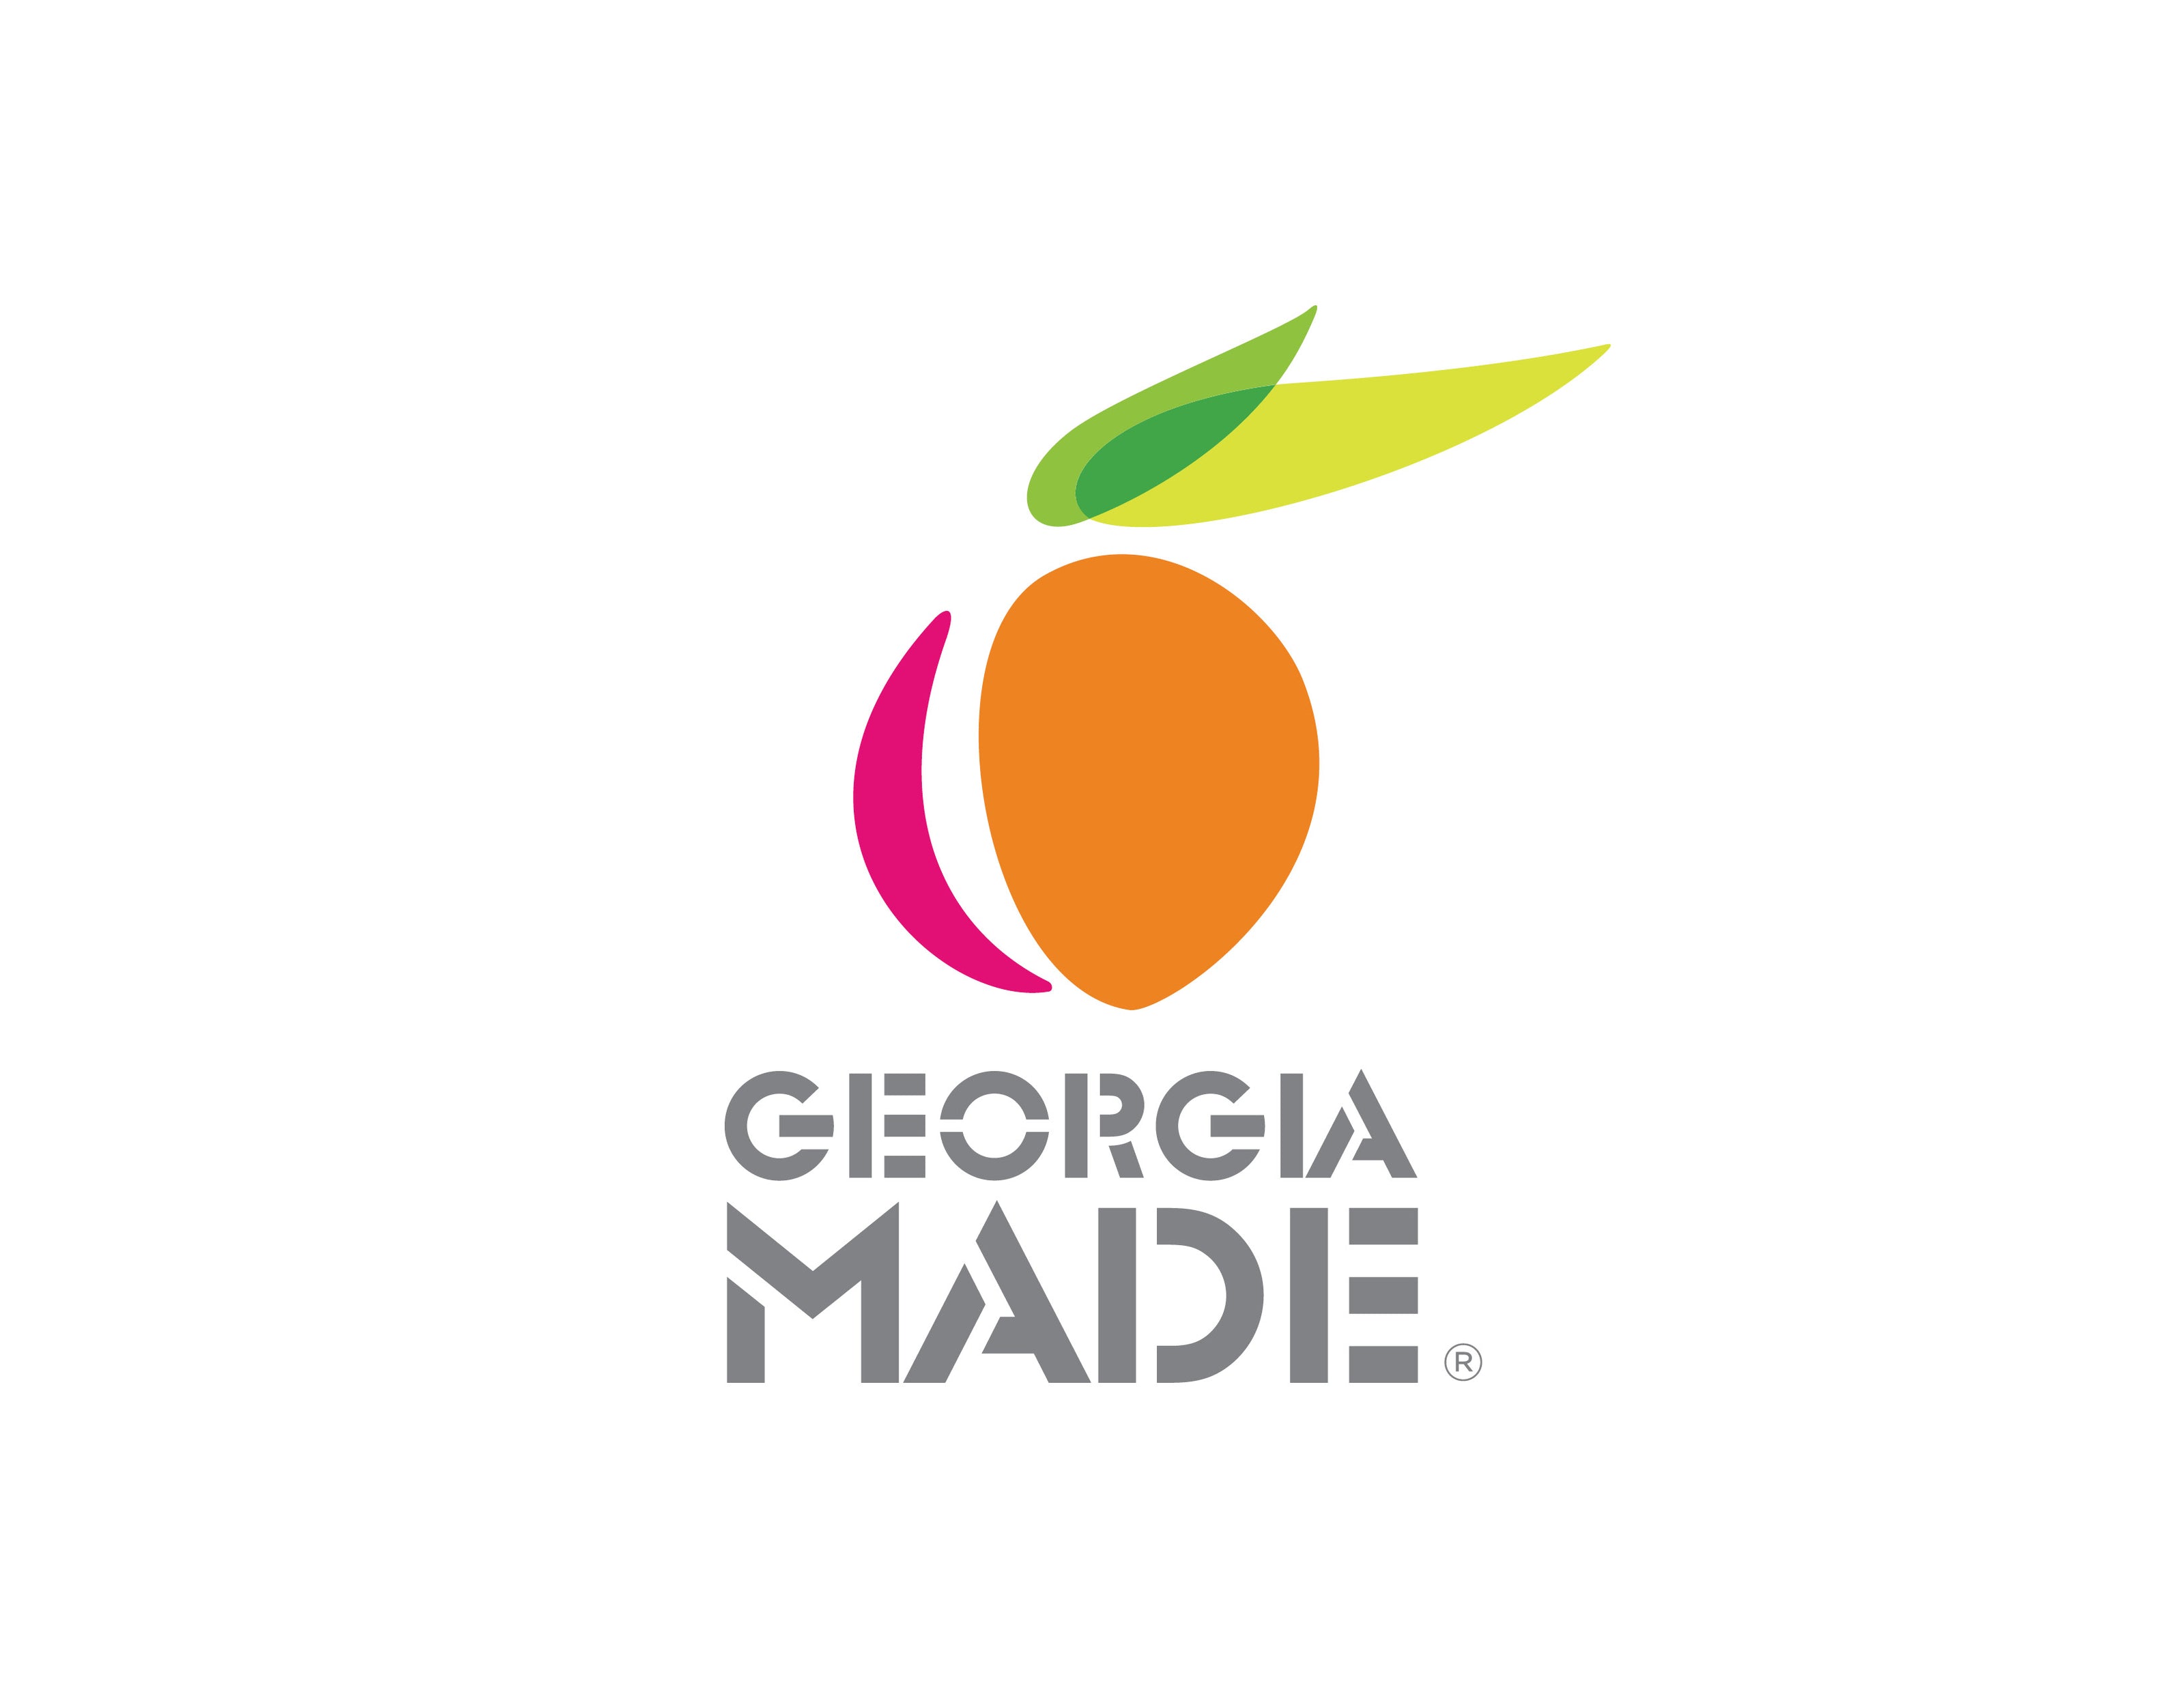 Proudly Made In Georgia